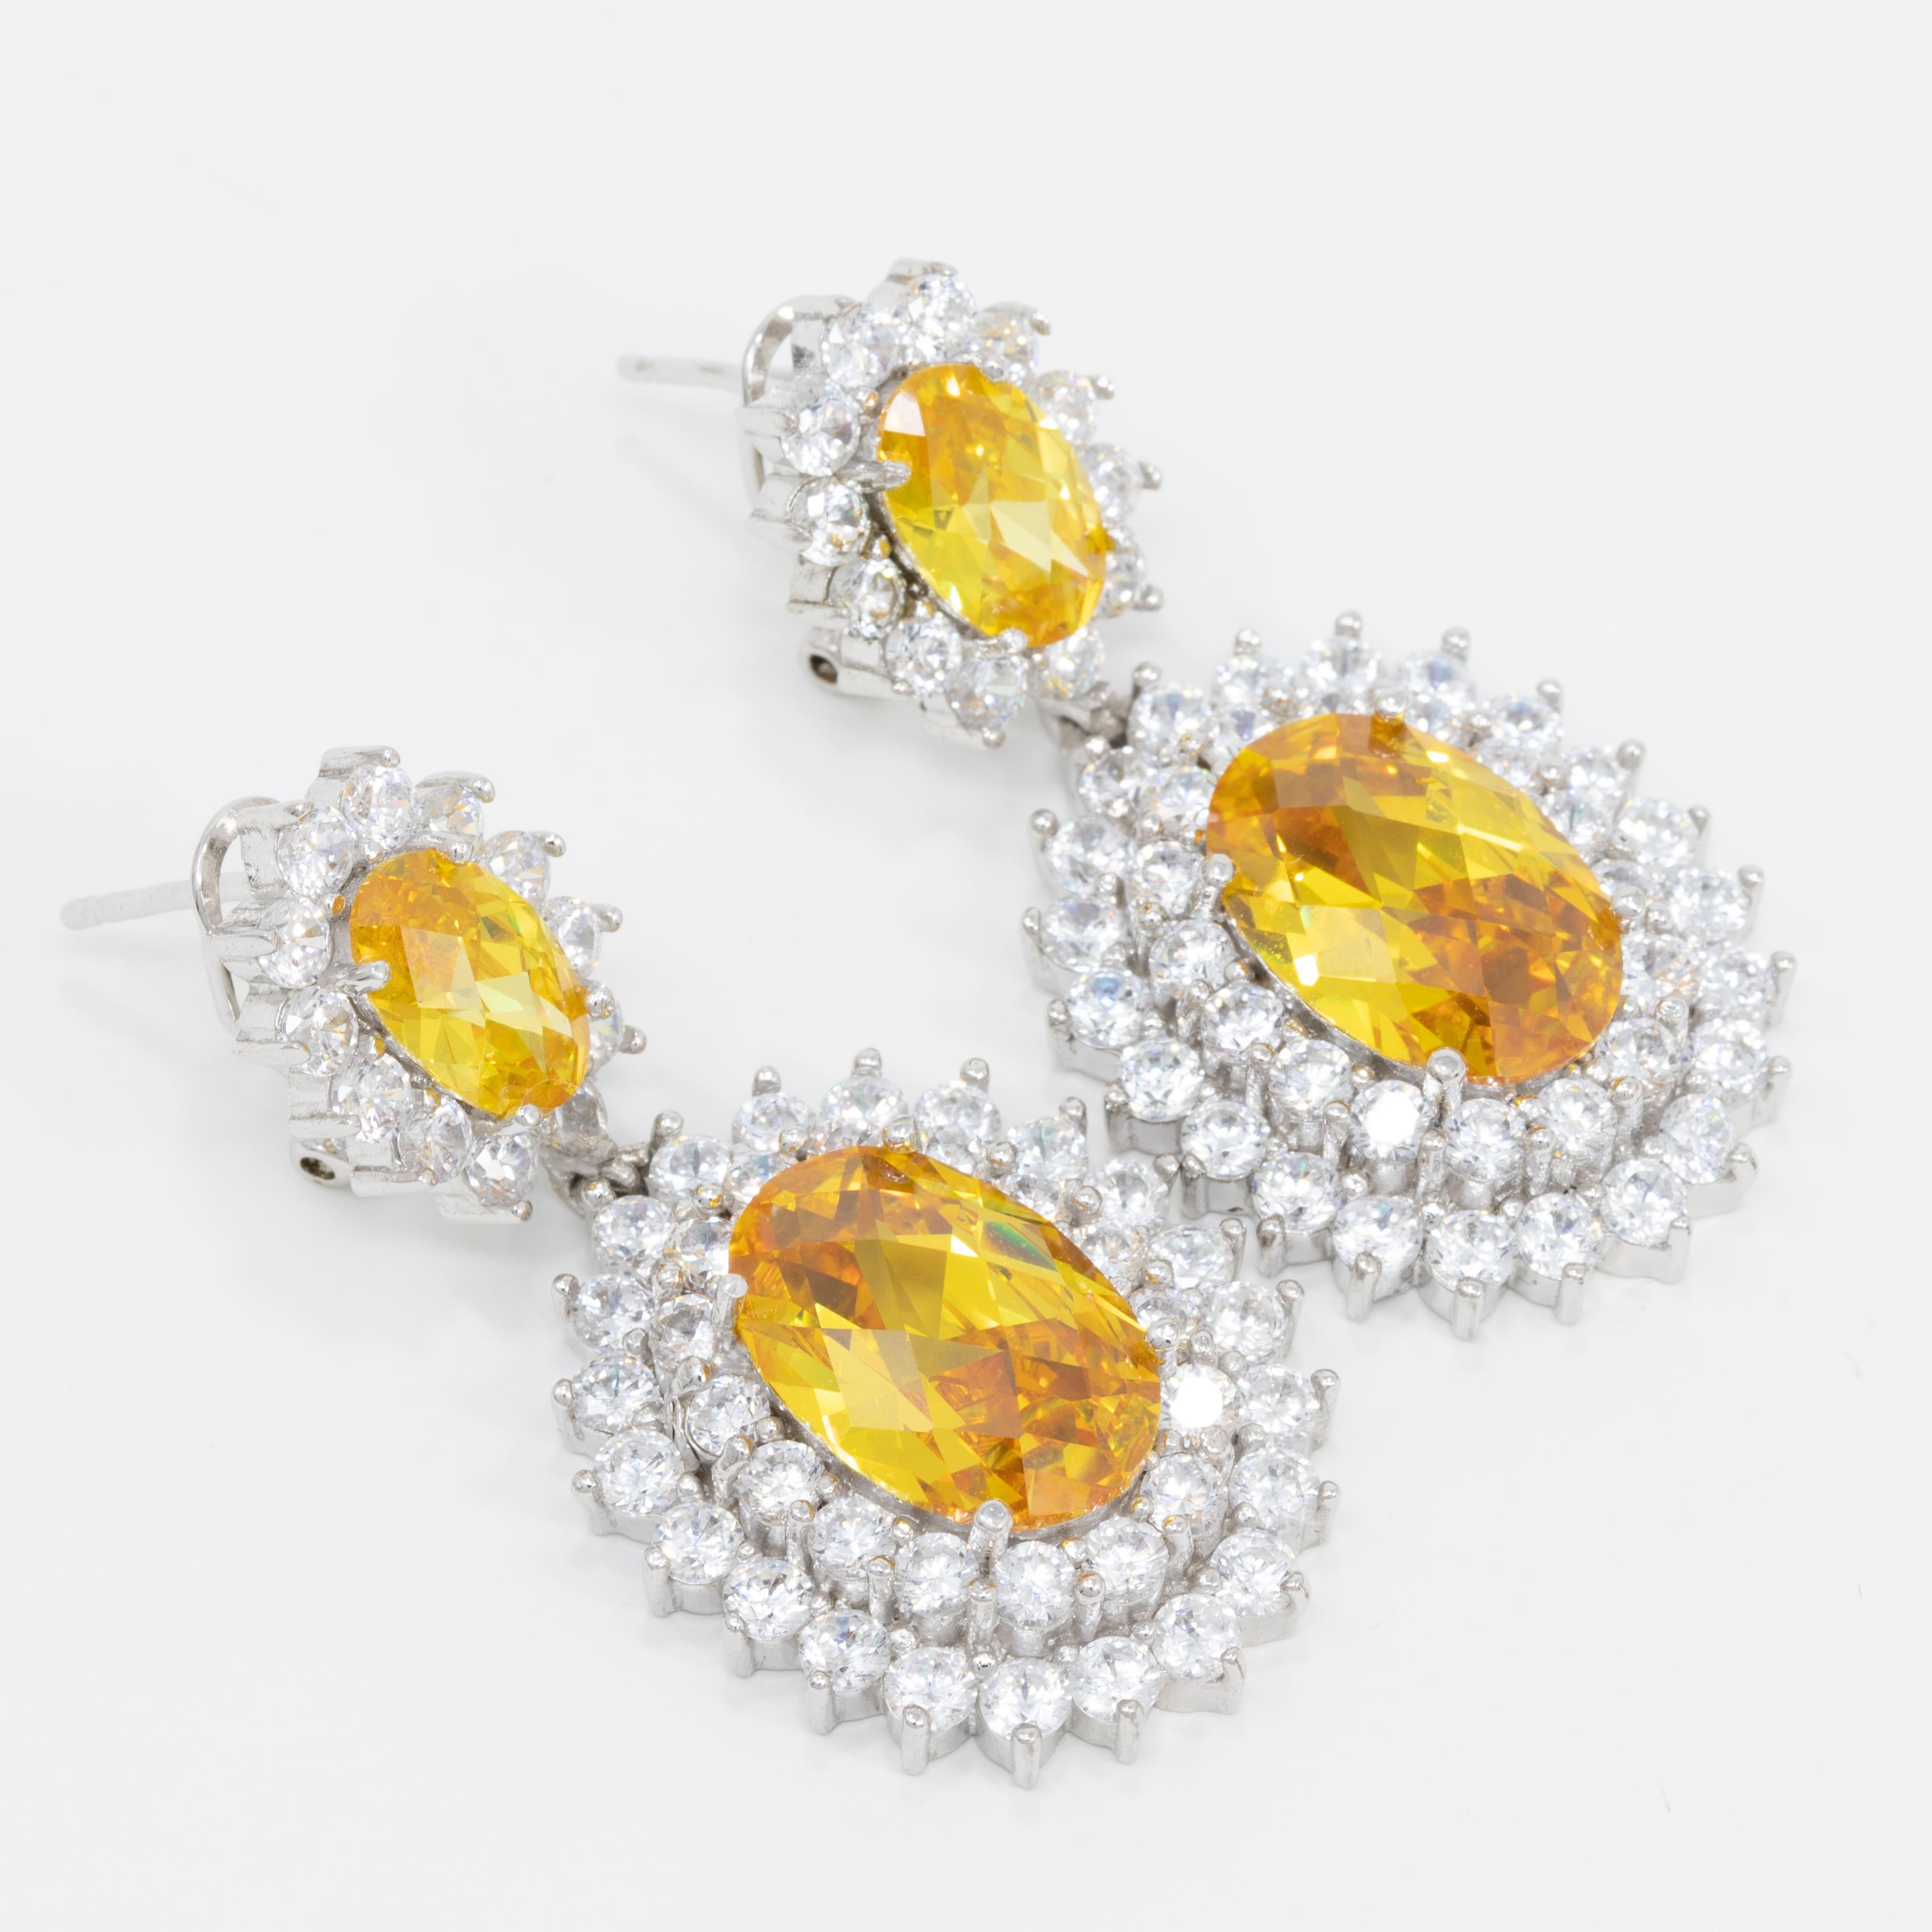 This dramatic and dazzling drop design sparkles with canary and clear cubic zirconia crystals. From Kenneth Jay Lane's CZ collection.

Rhodium Plated Brass. Post with Friction.

Tags, Marks, Hallmarks: KJL 

Designed in New York. Made in China.